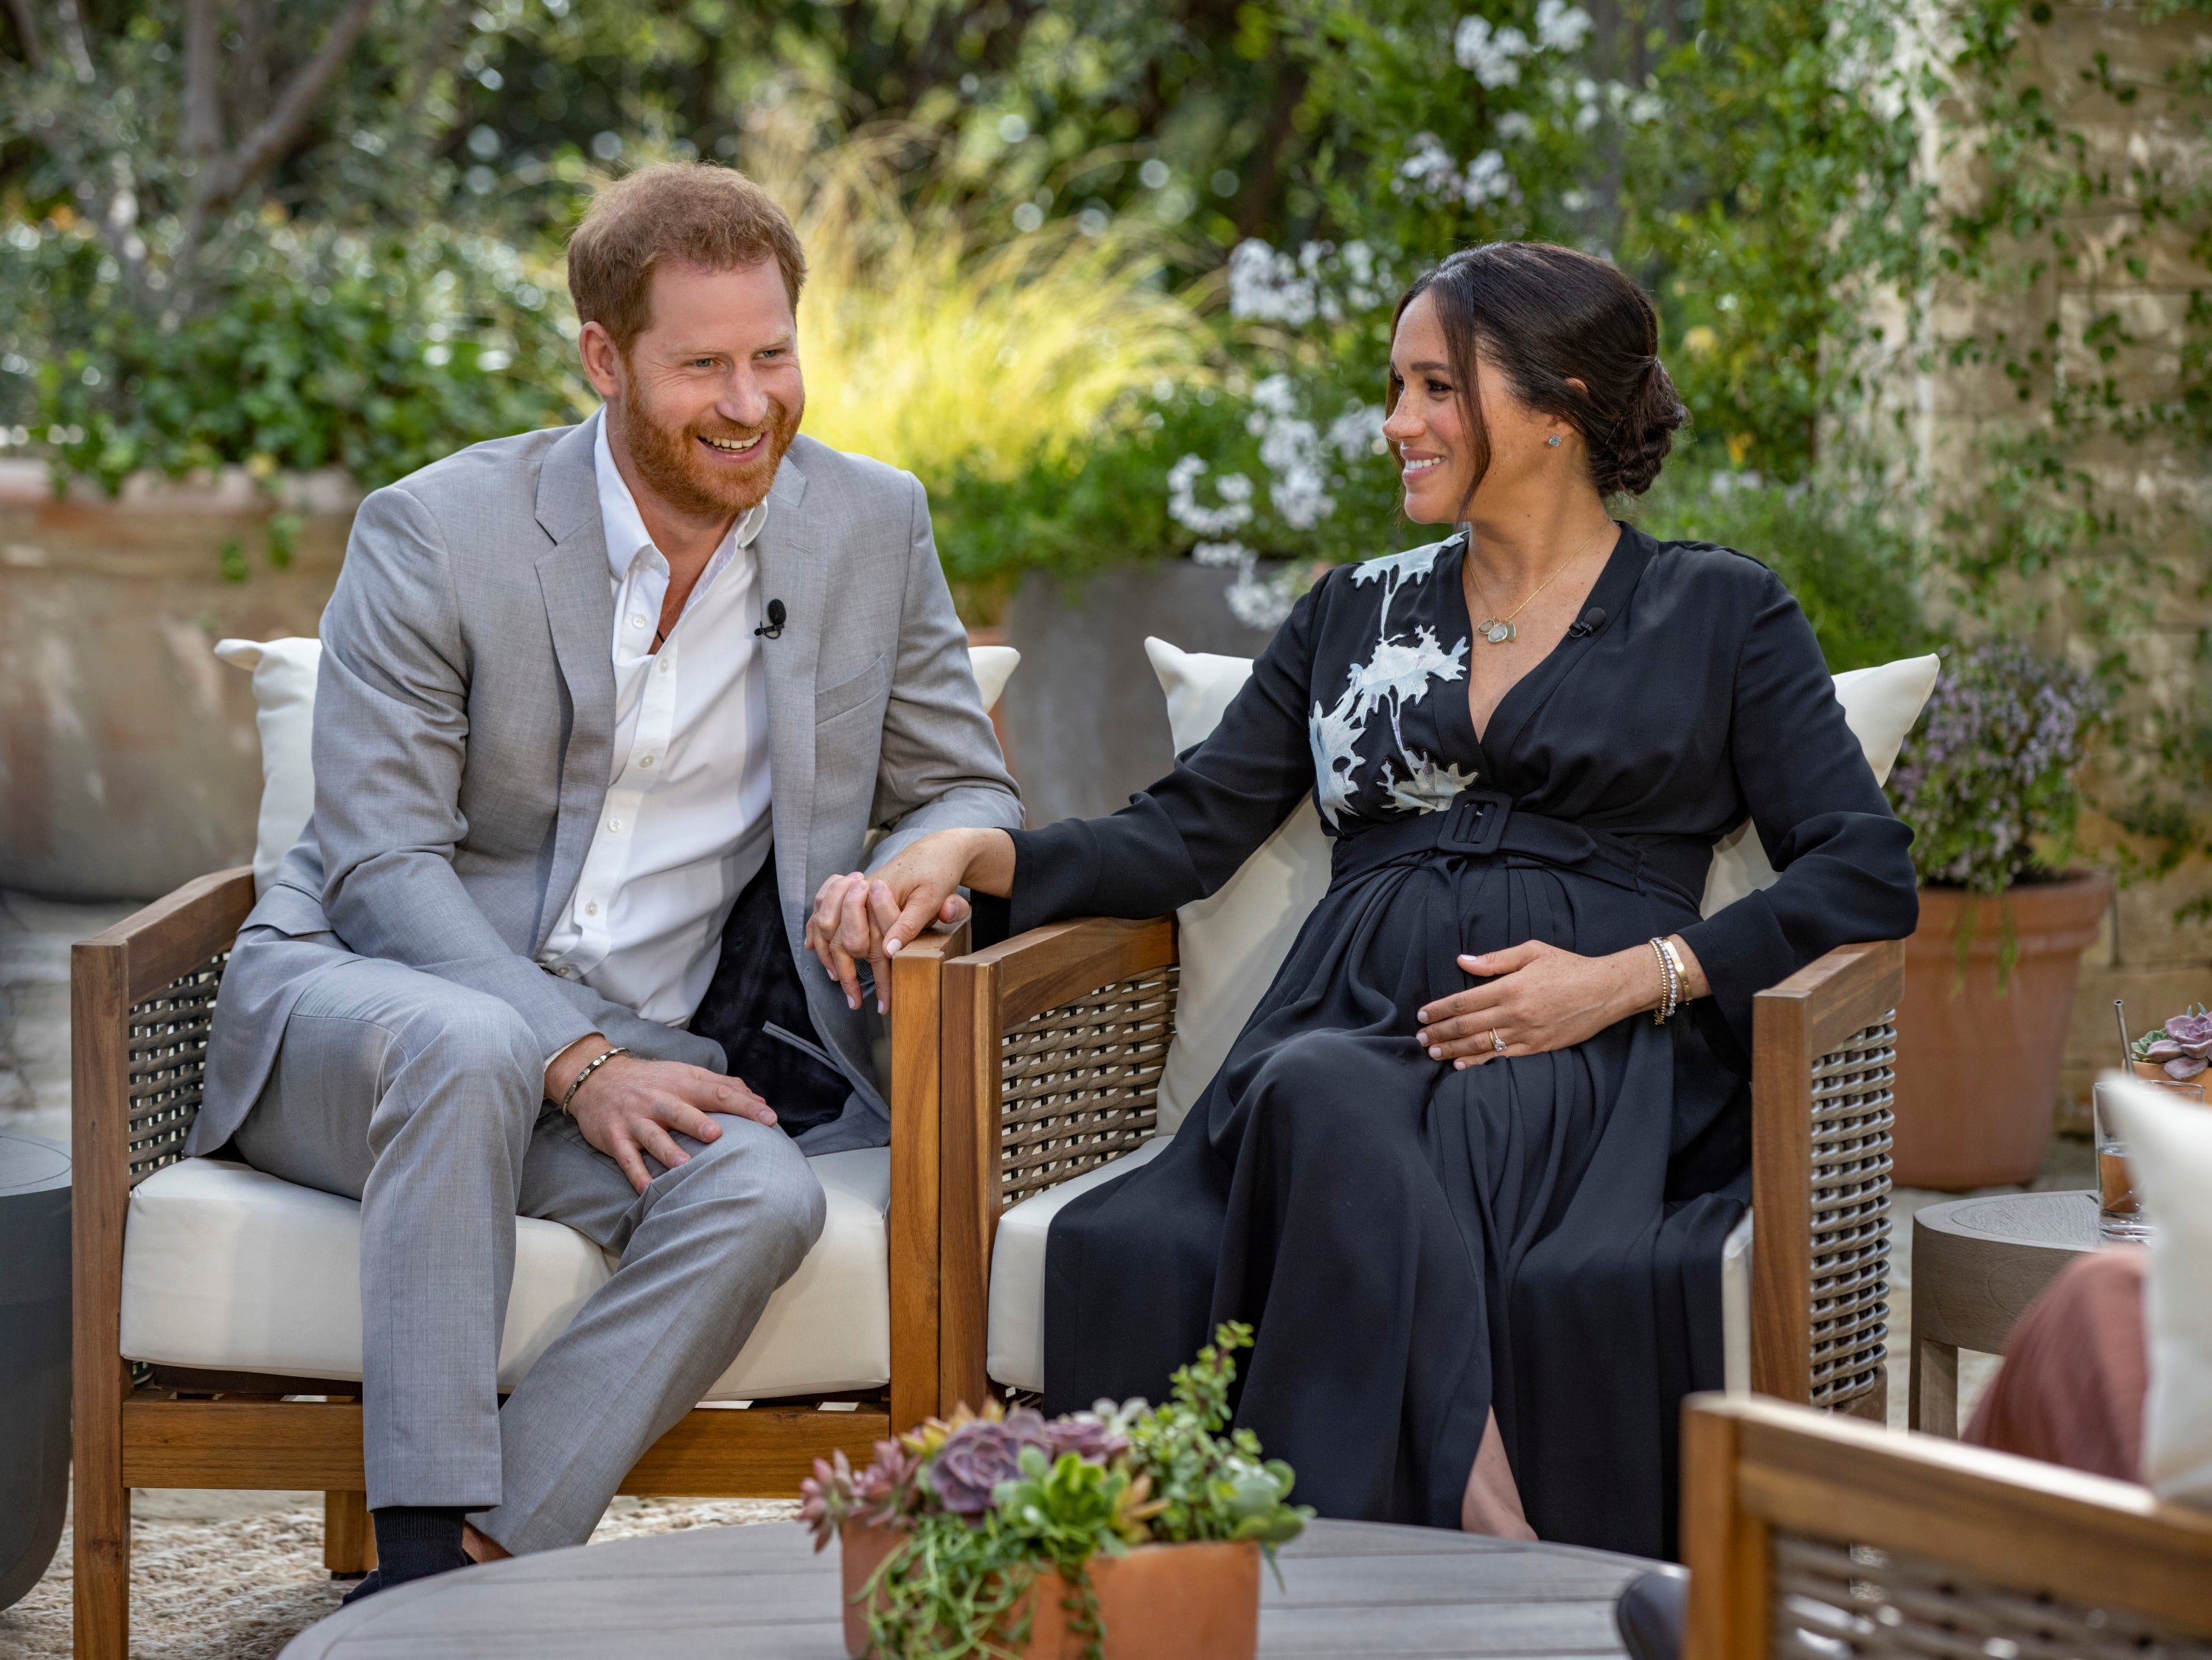 Meghan and Harry discuss royal patronages in their interview with Oprah